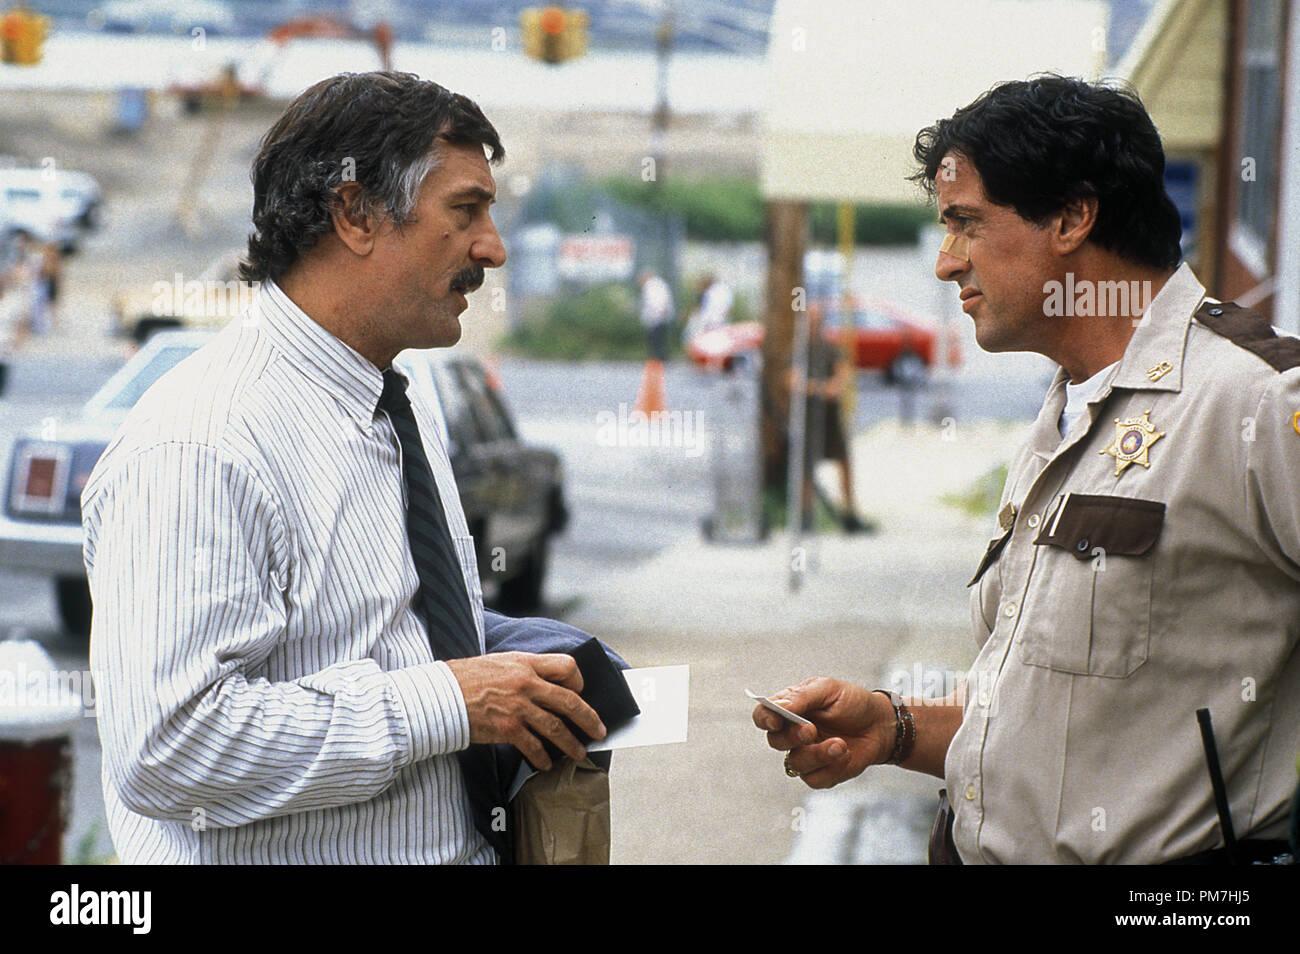 Film Still from 'Cop Land' Robert De Niro, Sylvester Stallone © 1997 Miramax Films Photo Credit: Sam Emerson   File Reference # 31013378THA  For Editorial Use Only - All Rights Reserved Stock Photo